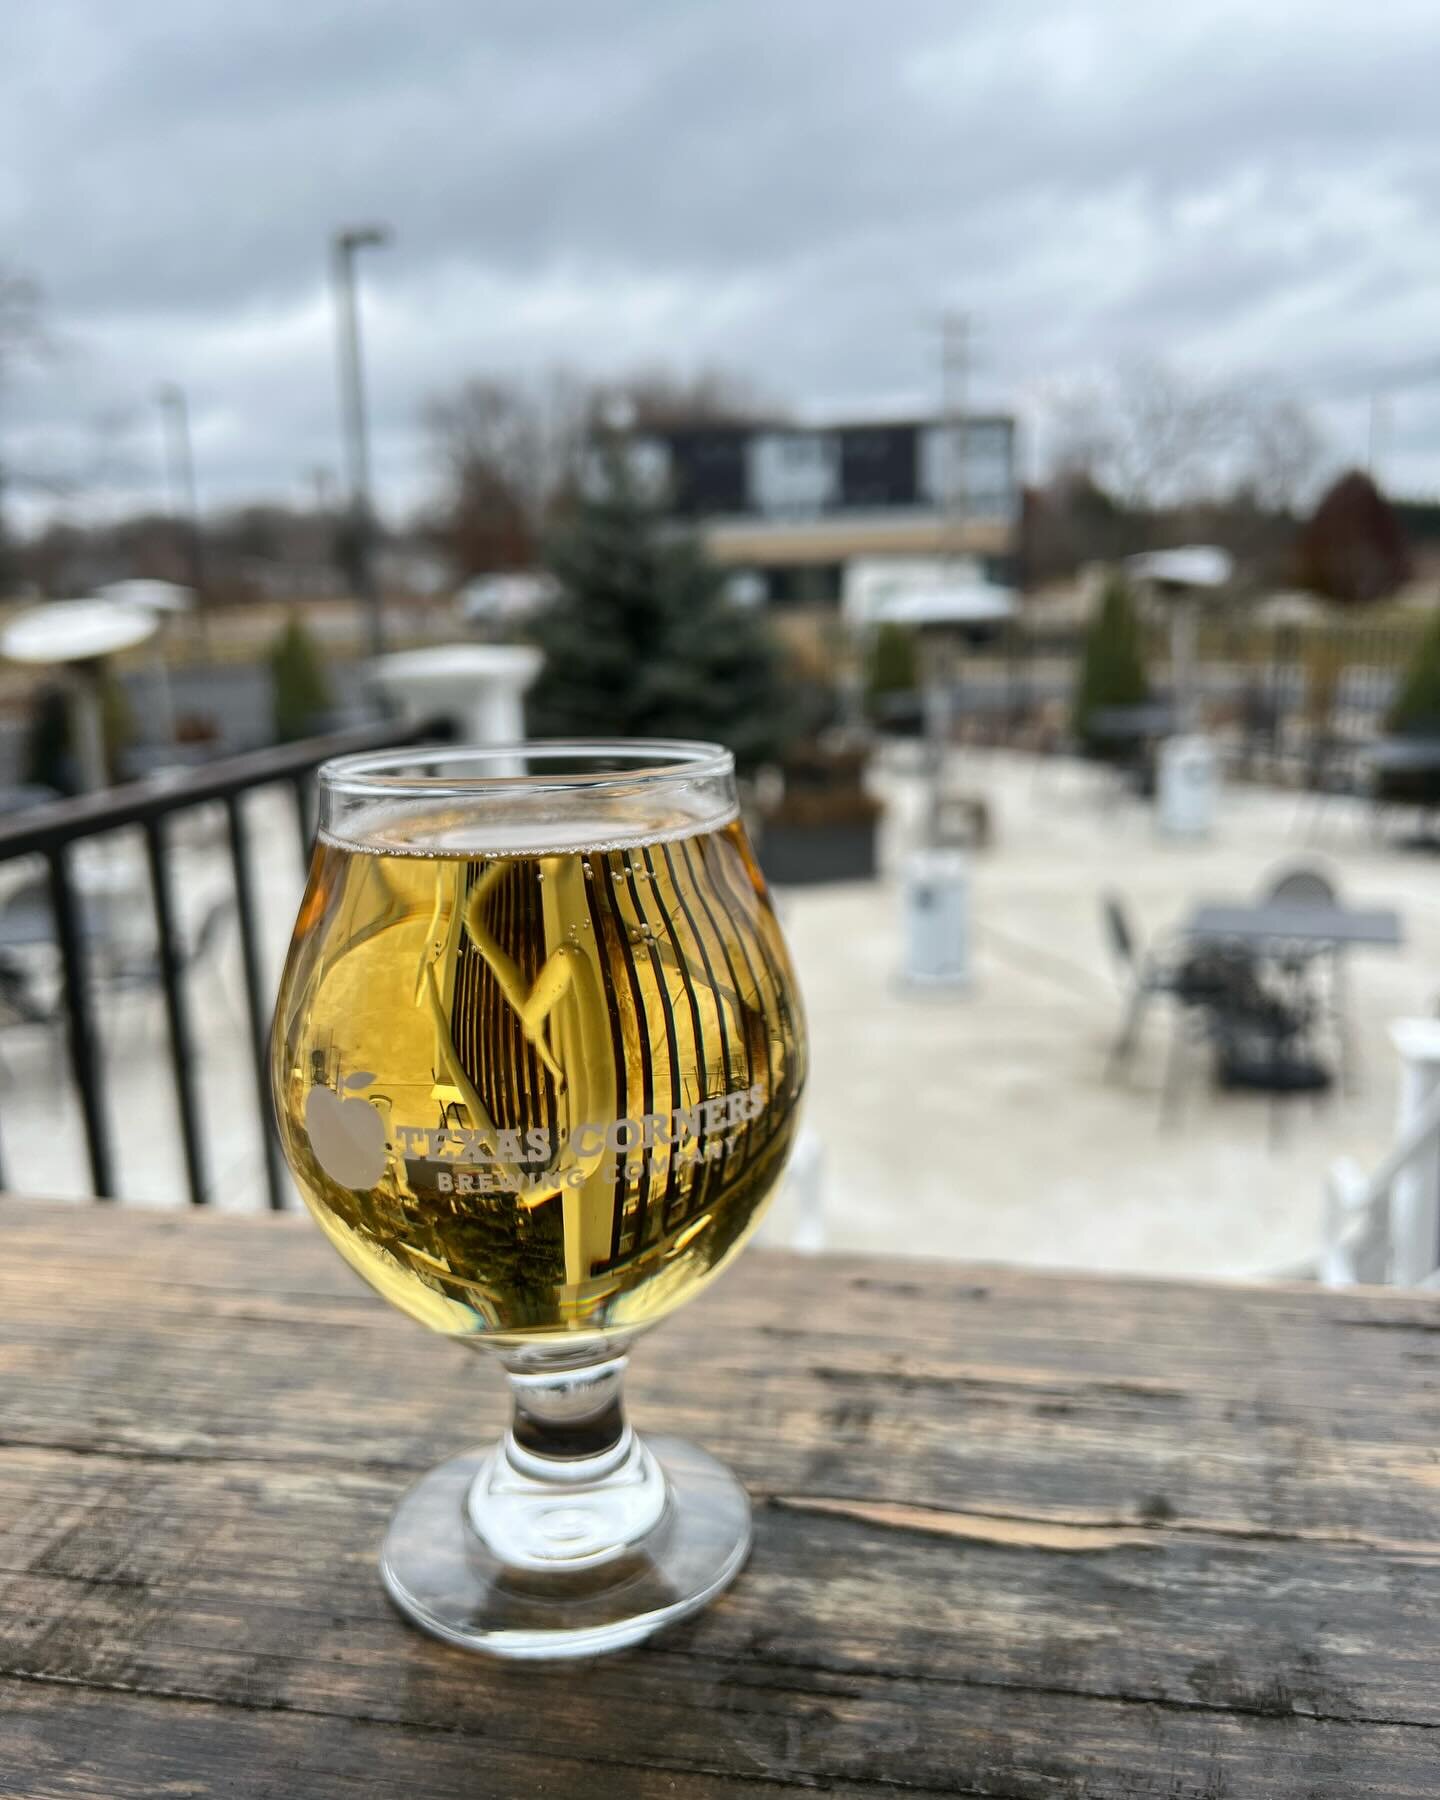 NEW SEASONAL BEER &amp; CIDER ALERT 🍻 🚨 ‼️ All three brews are seasonal offerings added in the last week and should be on draft for your enjoyment this winter!

BBA Maple Cider - 9.0% ABV. Hard cider laid down in used bourbon barrels with real Mich